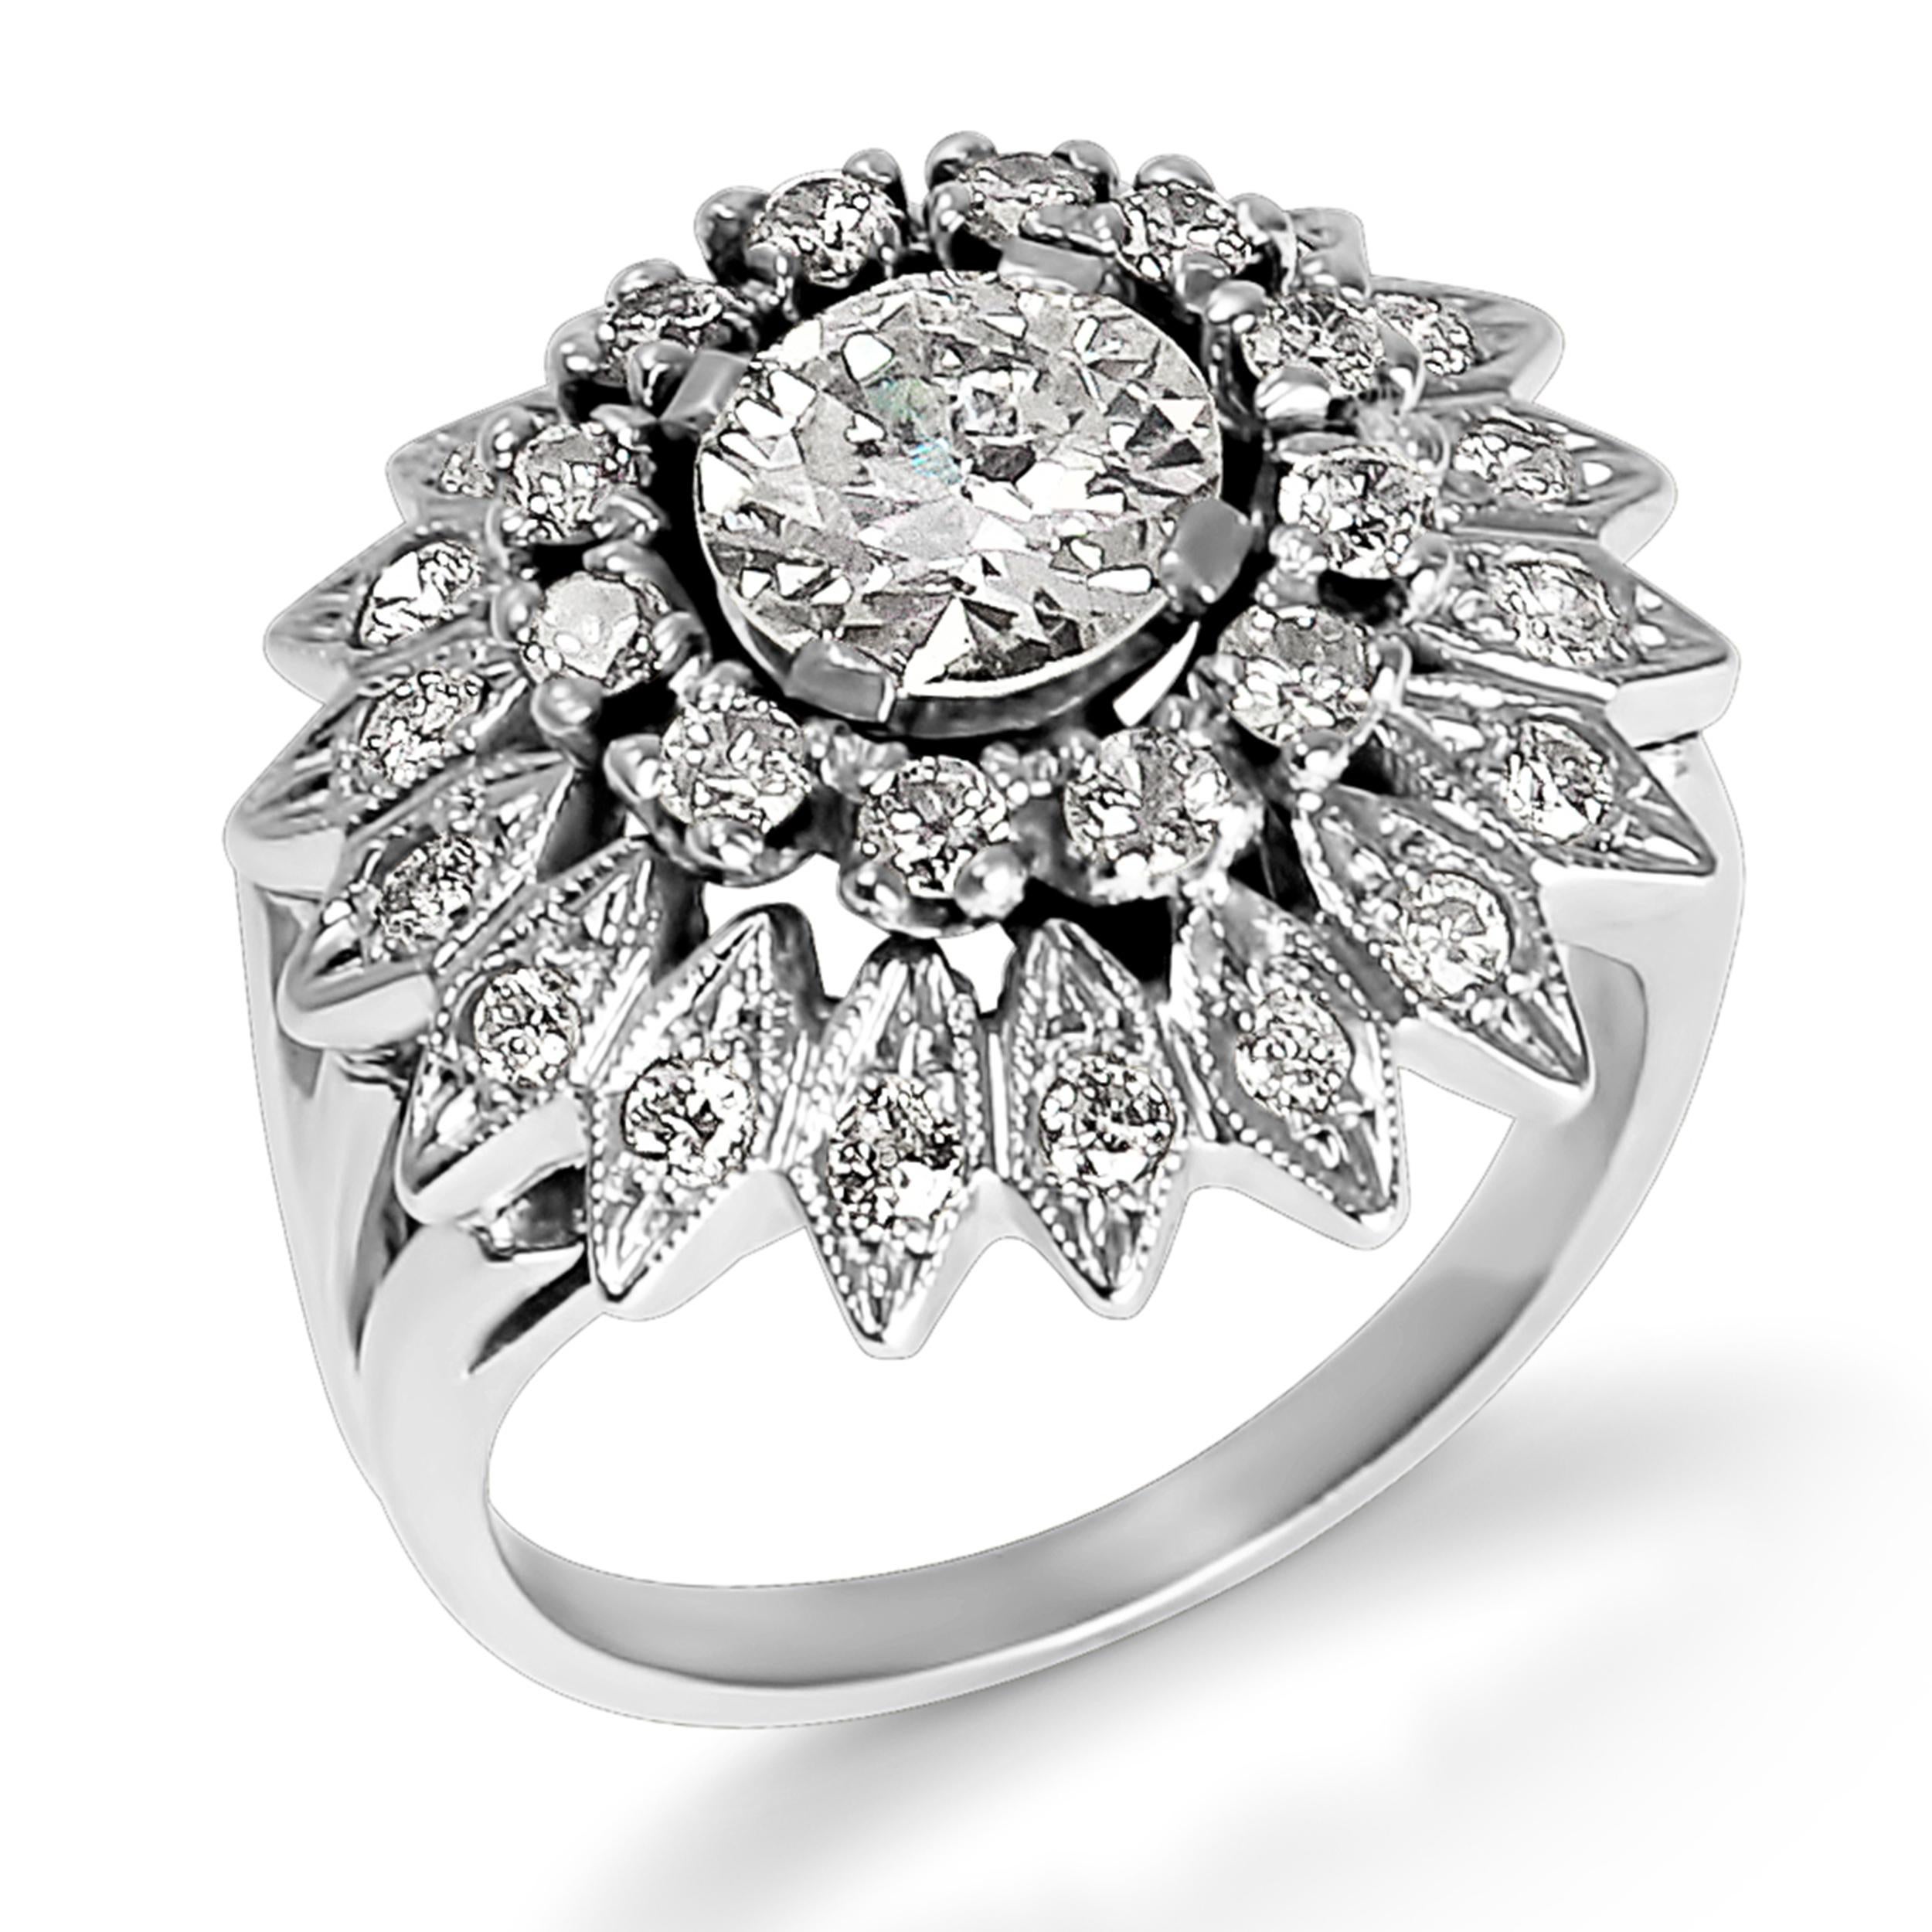 This sensational cocktail ring is a one of a kind statement piece! Featuring a 1.50 carat round diamond, the center stone is surrounded by a halo of 2.00 millimeter round diamonds. The magnificent starburst halo is detailed with millgrain and 1.5